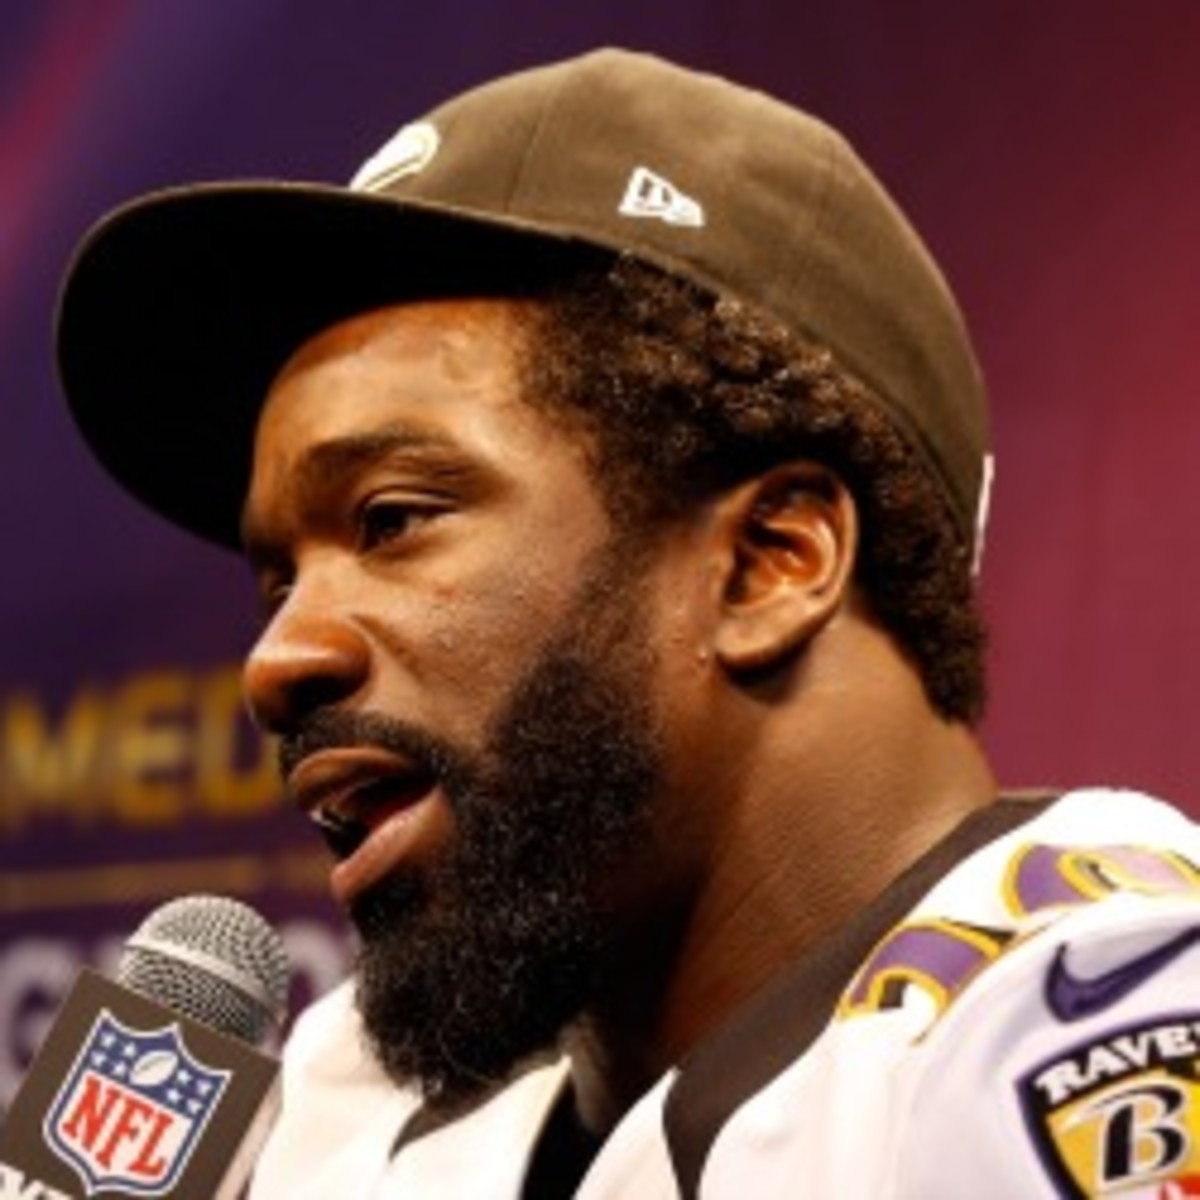 Ravens safety Ed Reed says he feels the effects of repeated hard hits over his career. (Scott Halleran/Getty Images)